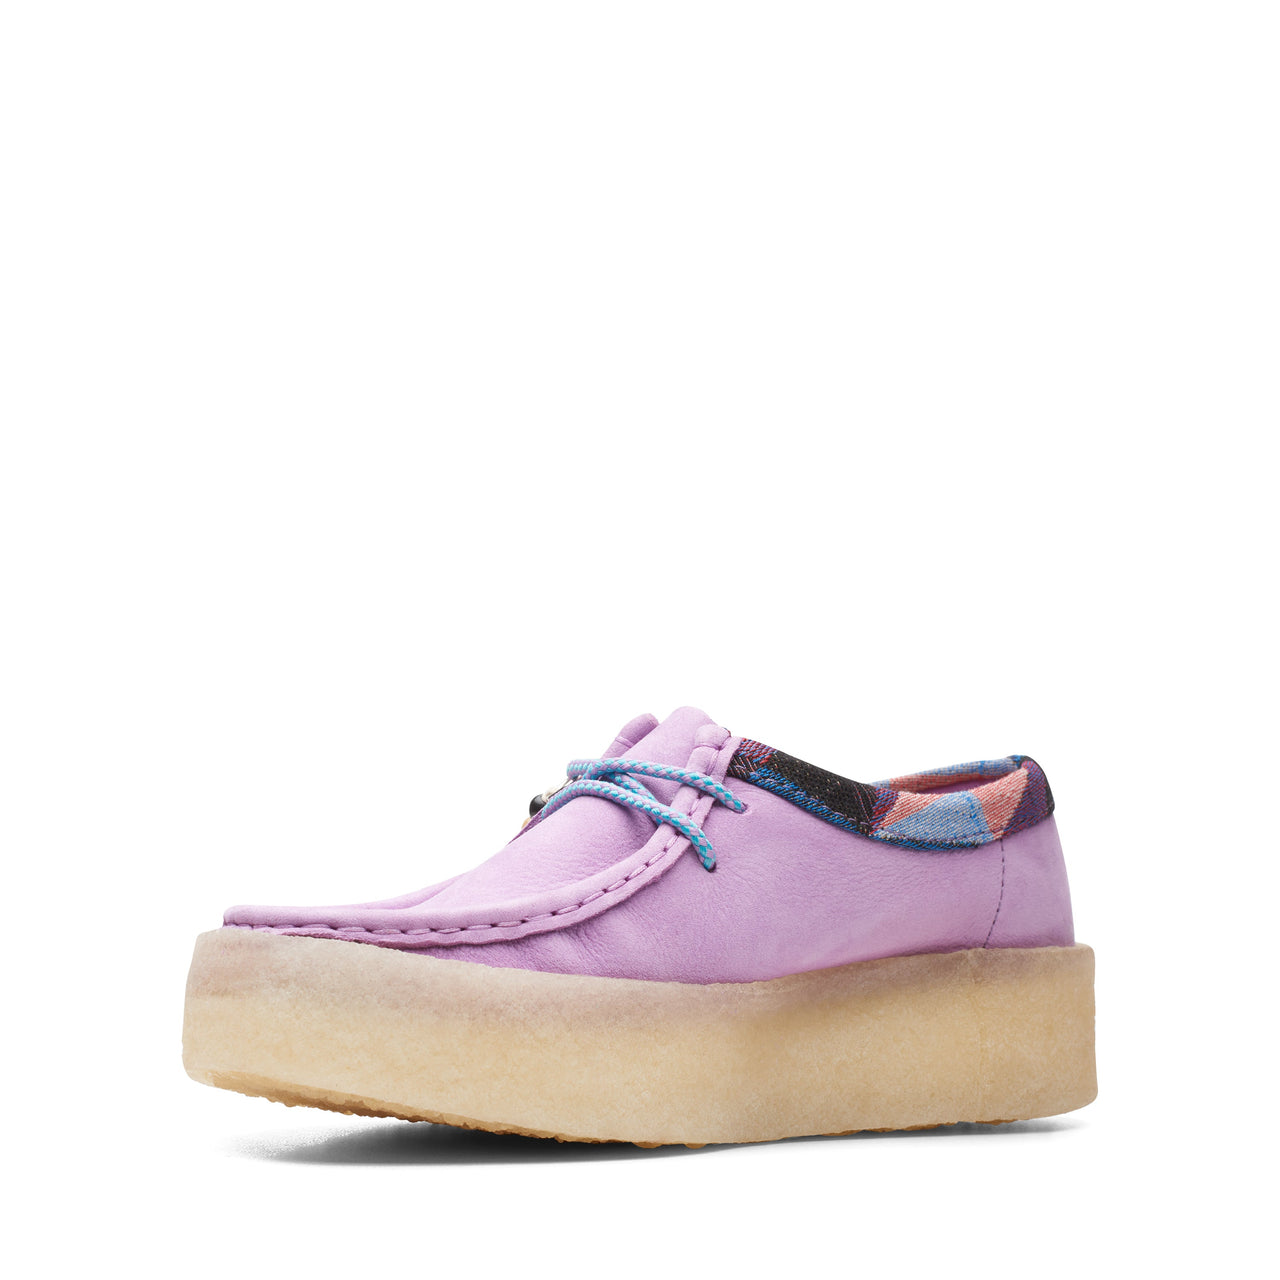  Stylish and comfortable light purple Clarks Women Wallabee Cup Shoes